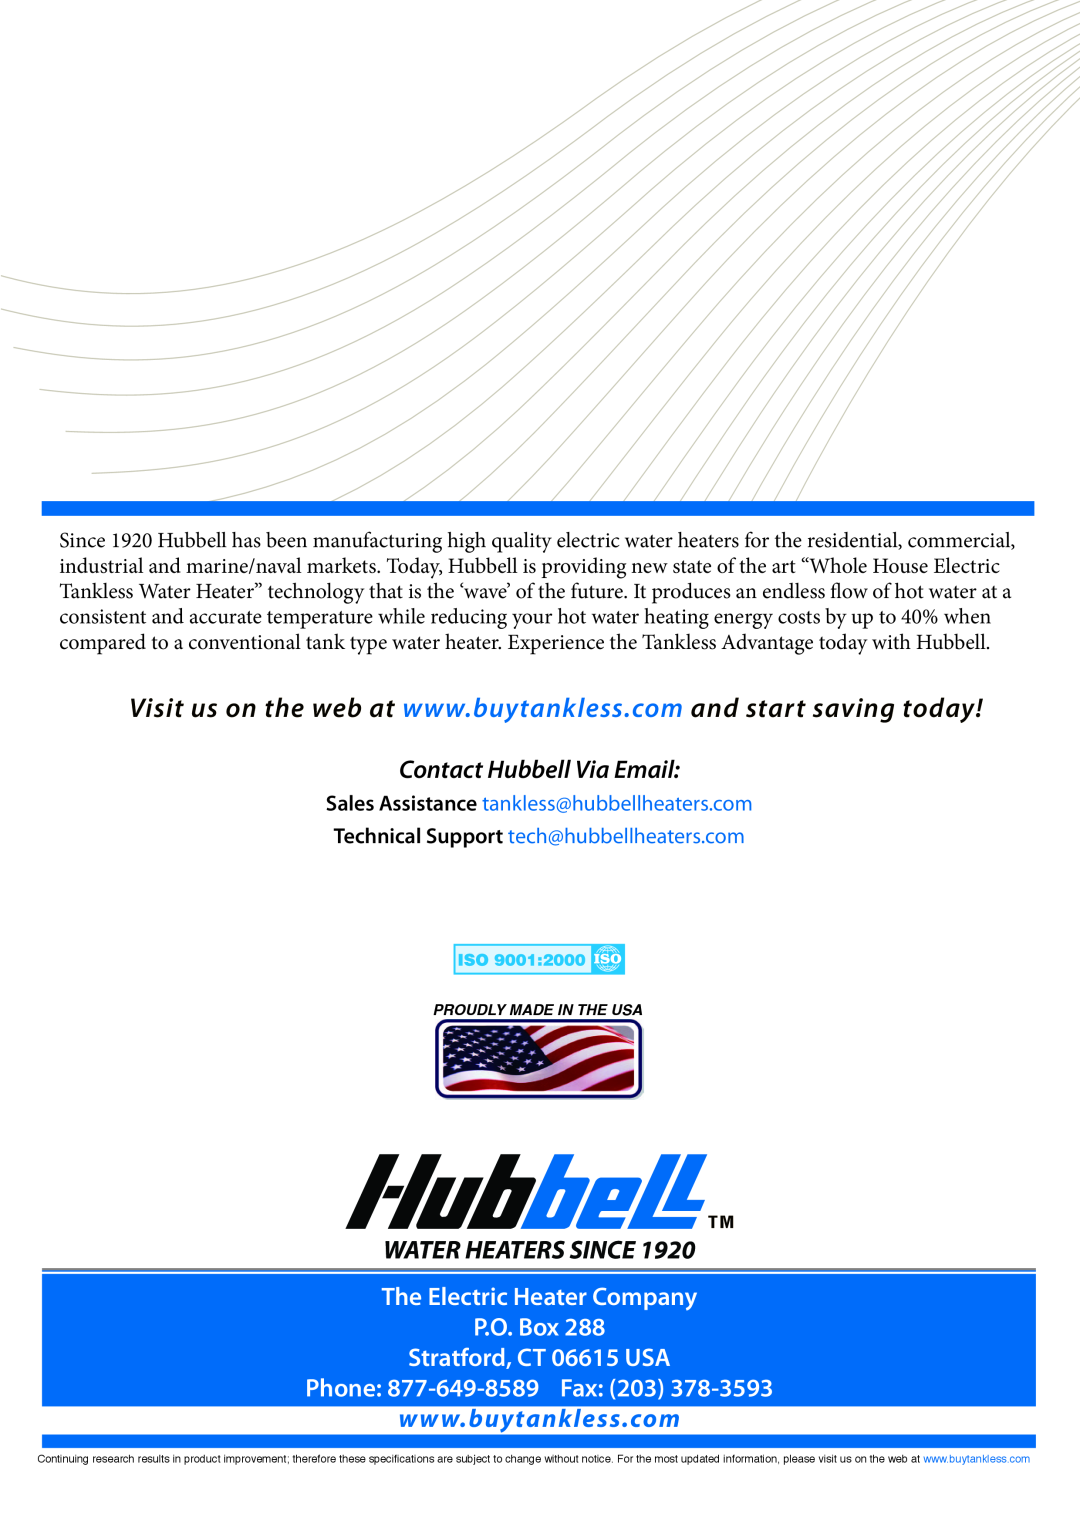 Hubbell Electric Heater Company 280-3 27 kW manual Contact Hubbell Via Email, Water Heaters Since, Phone 877-649-8589 Fax 